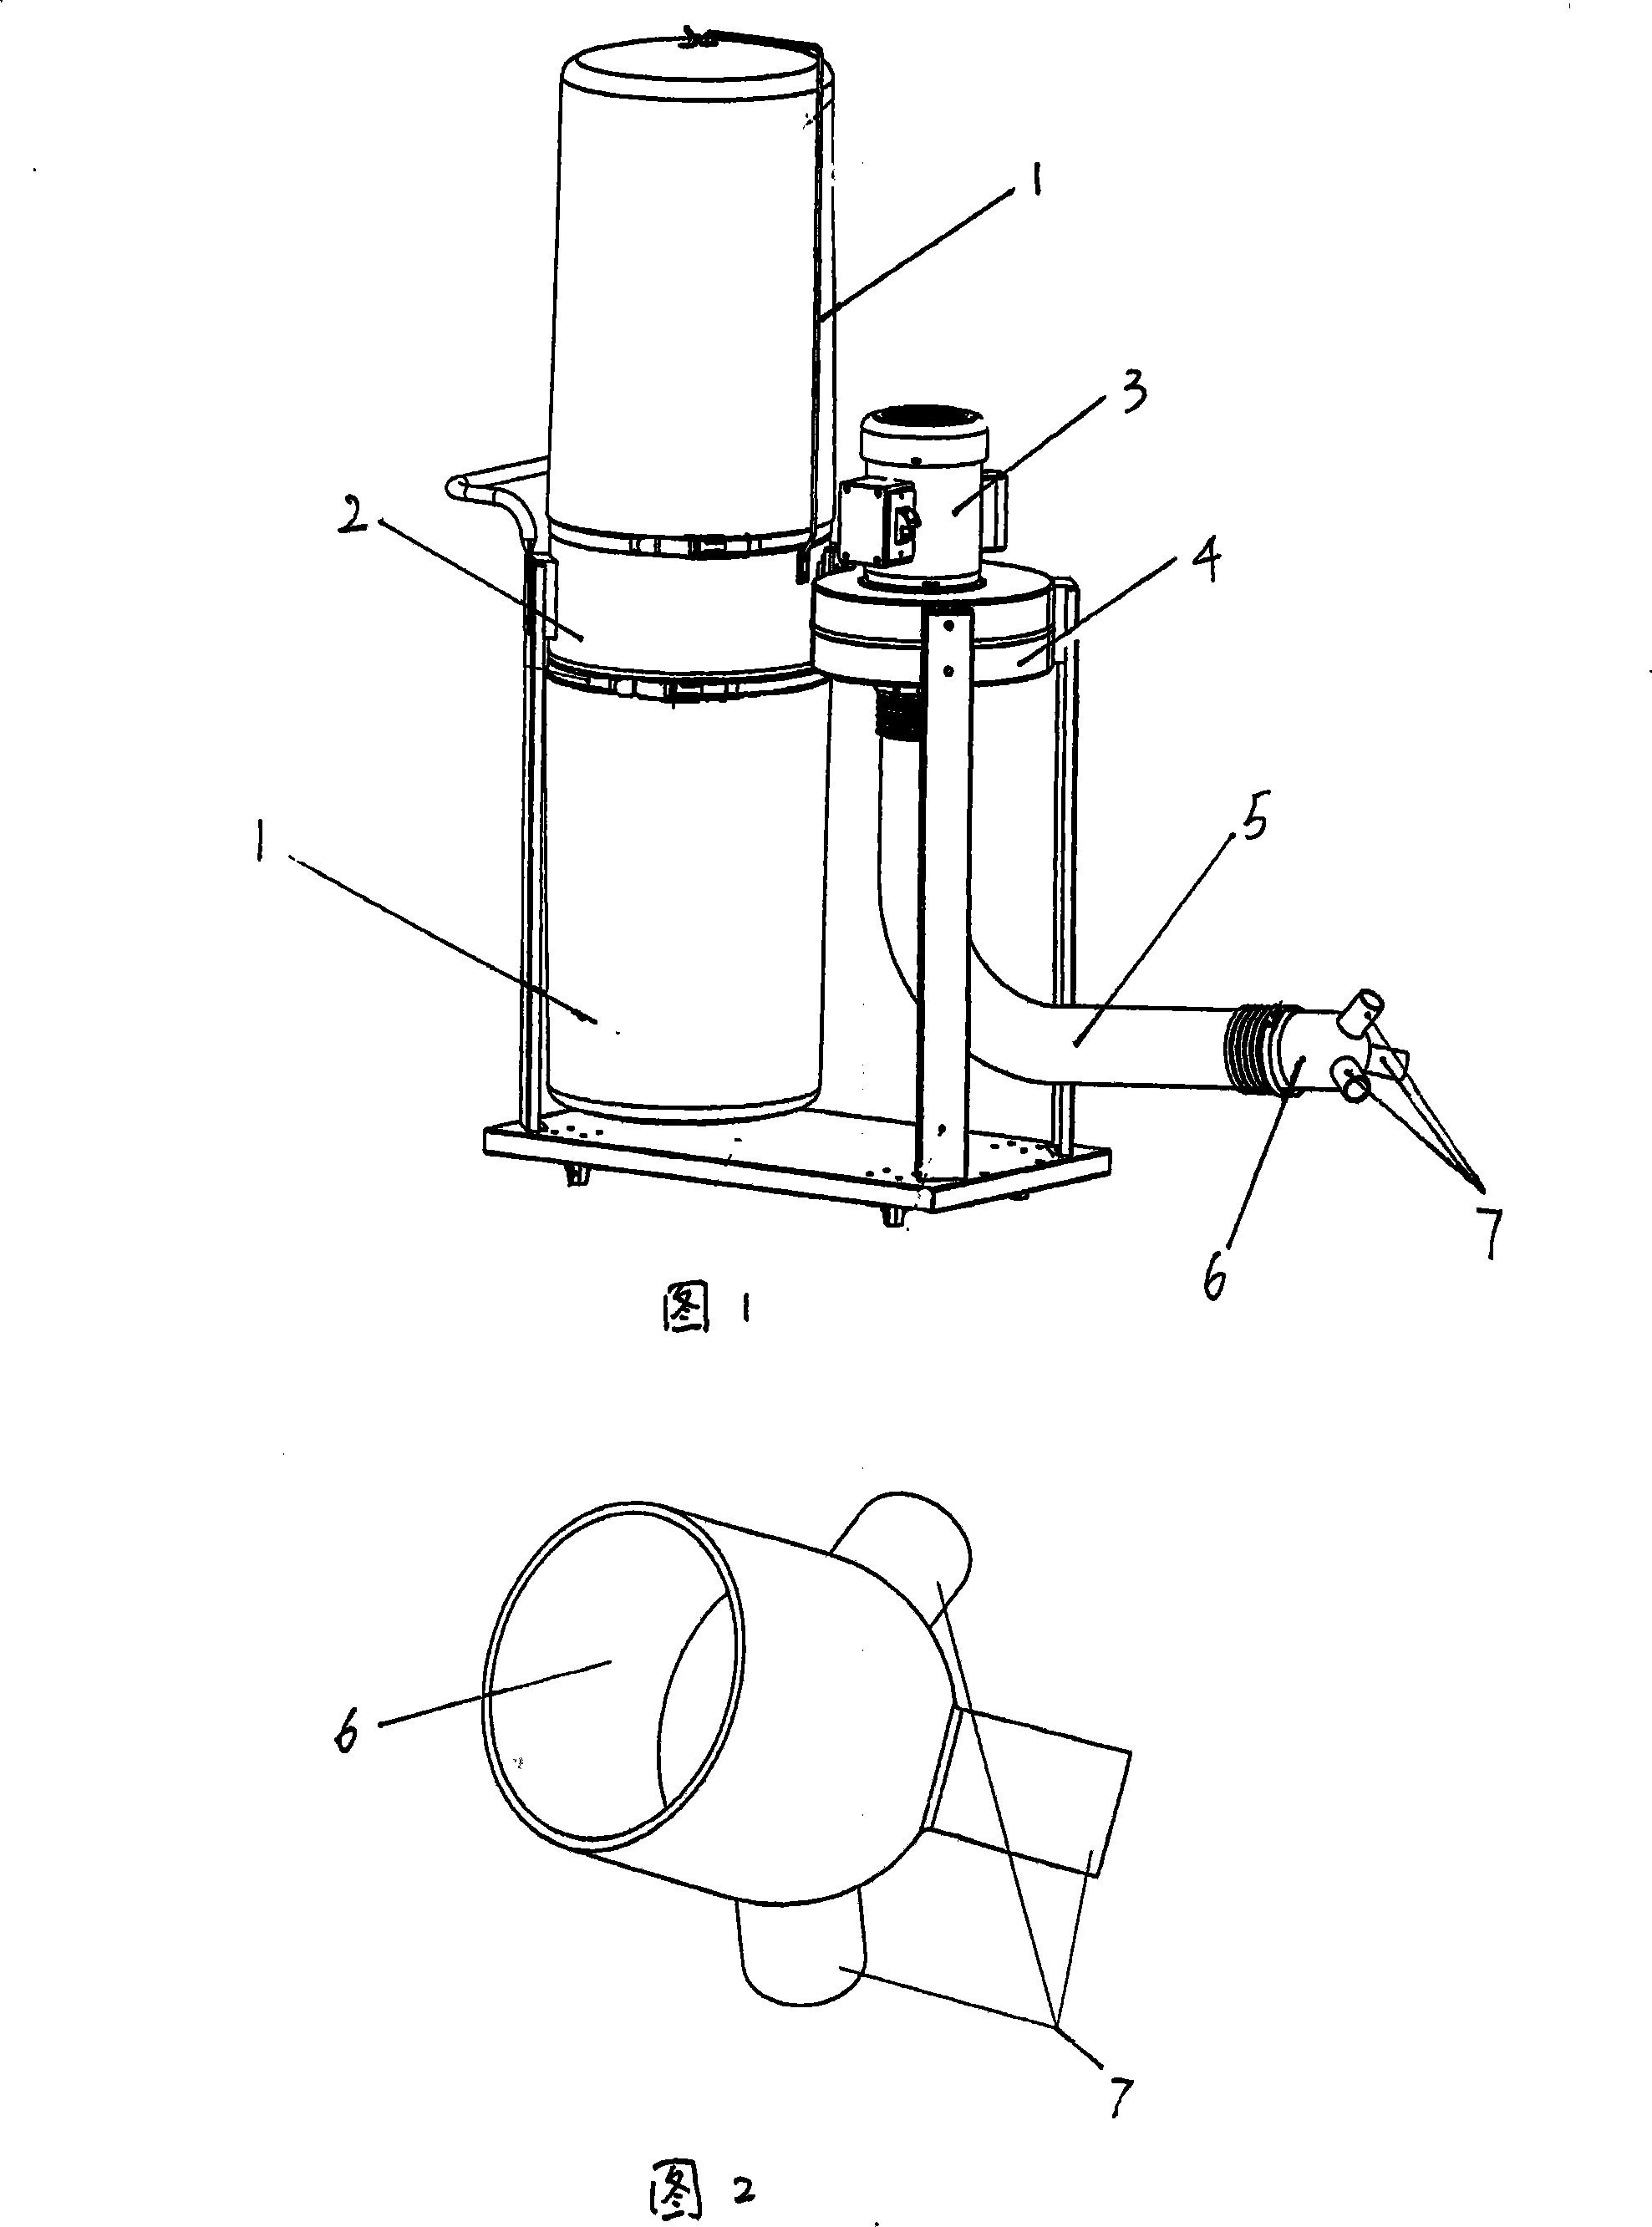 A dust collecting equipment for wood-working machine